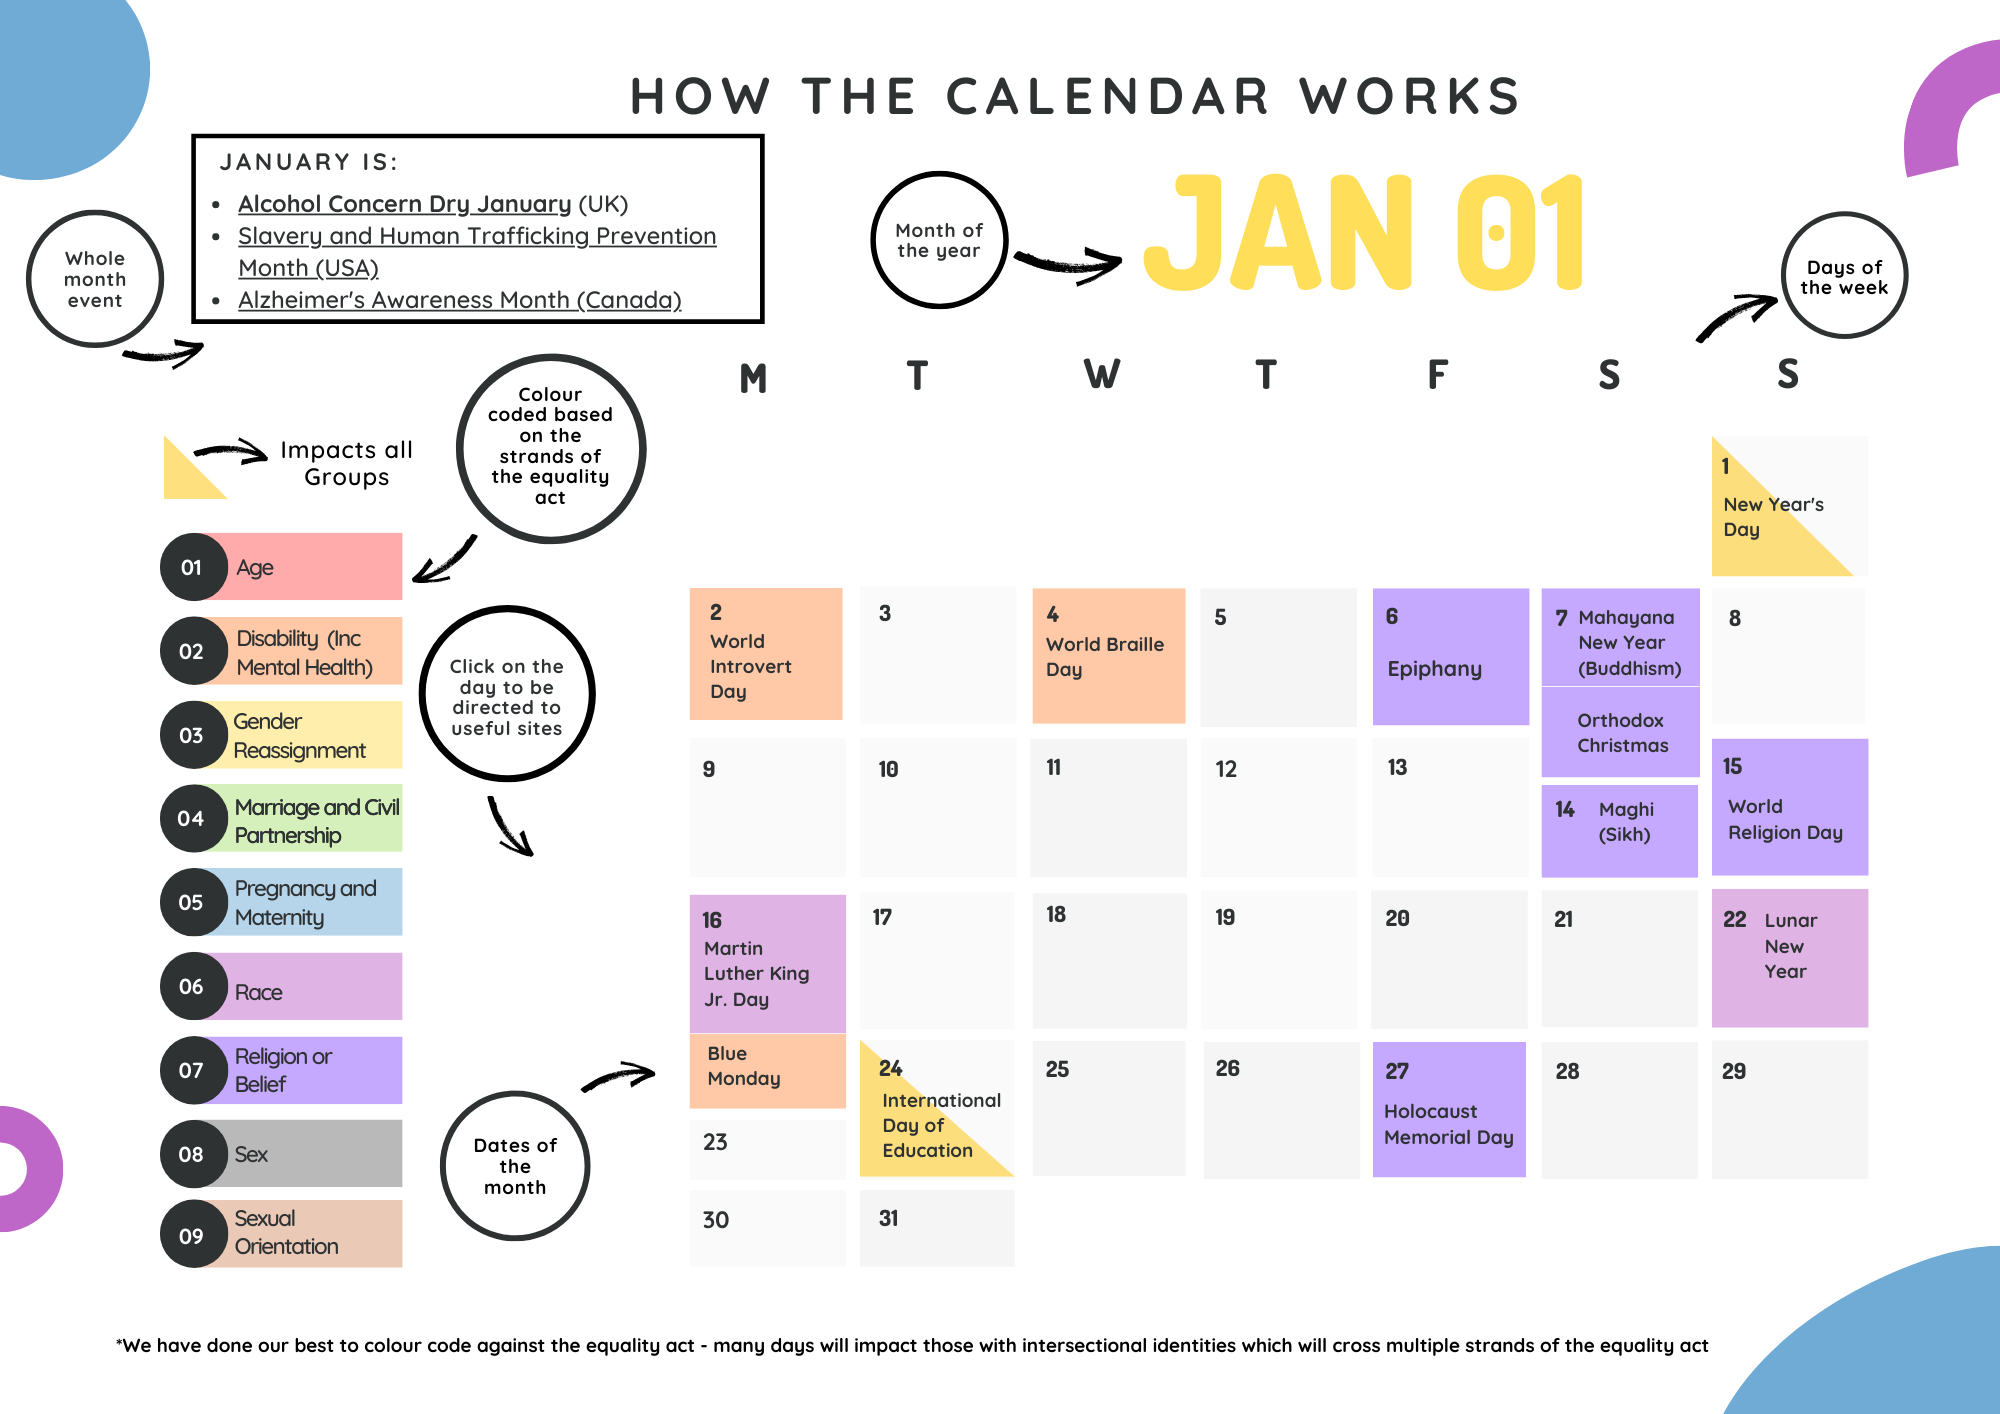 Diversity, Equality and Inclusion Calendar 2023 — Dual Frequency